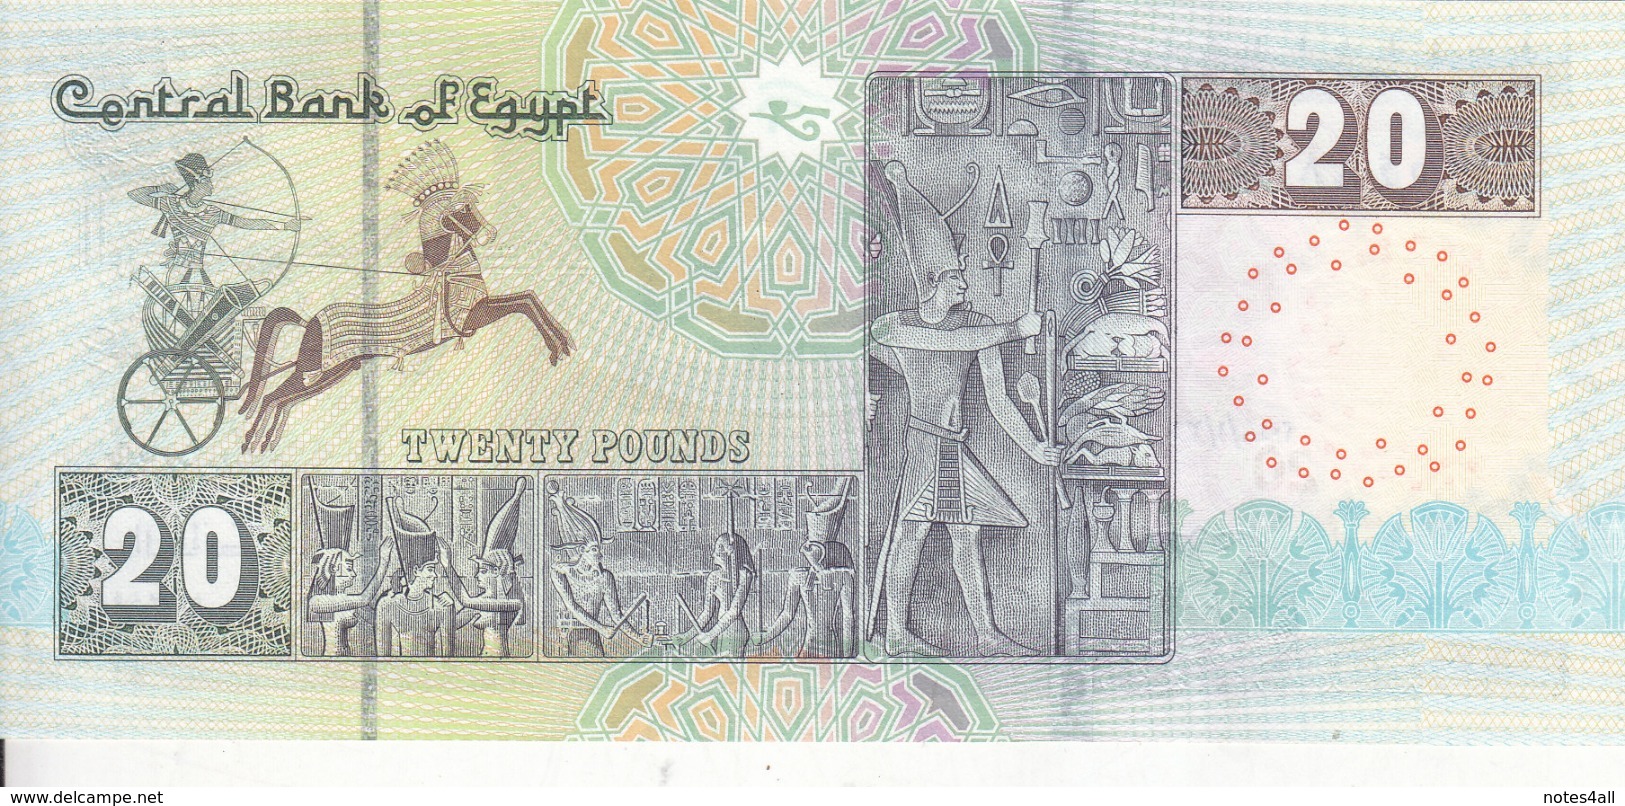 EGYPT 20 POUNDS EGP 2016 P-65 NEW SIG/T.AMER #24 BROWN LOW SERIAL 00006XX UNC - Egypte